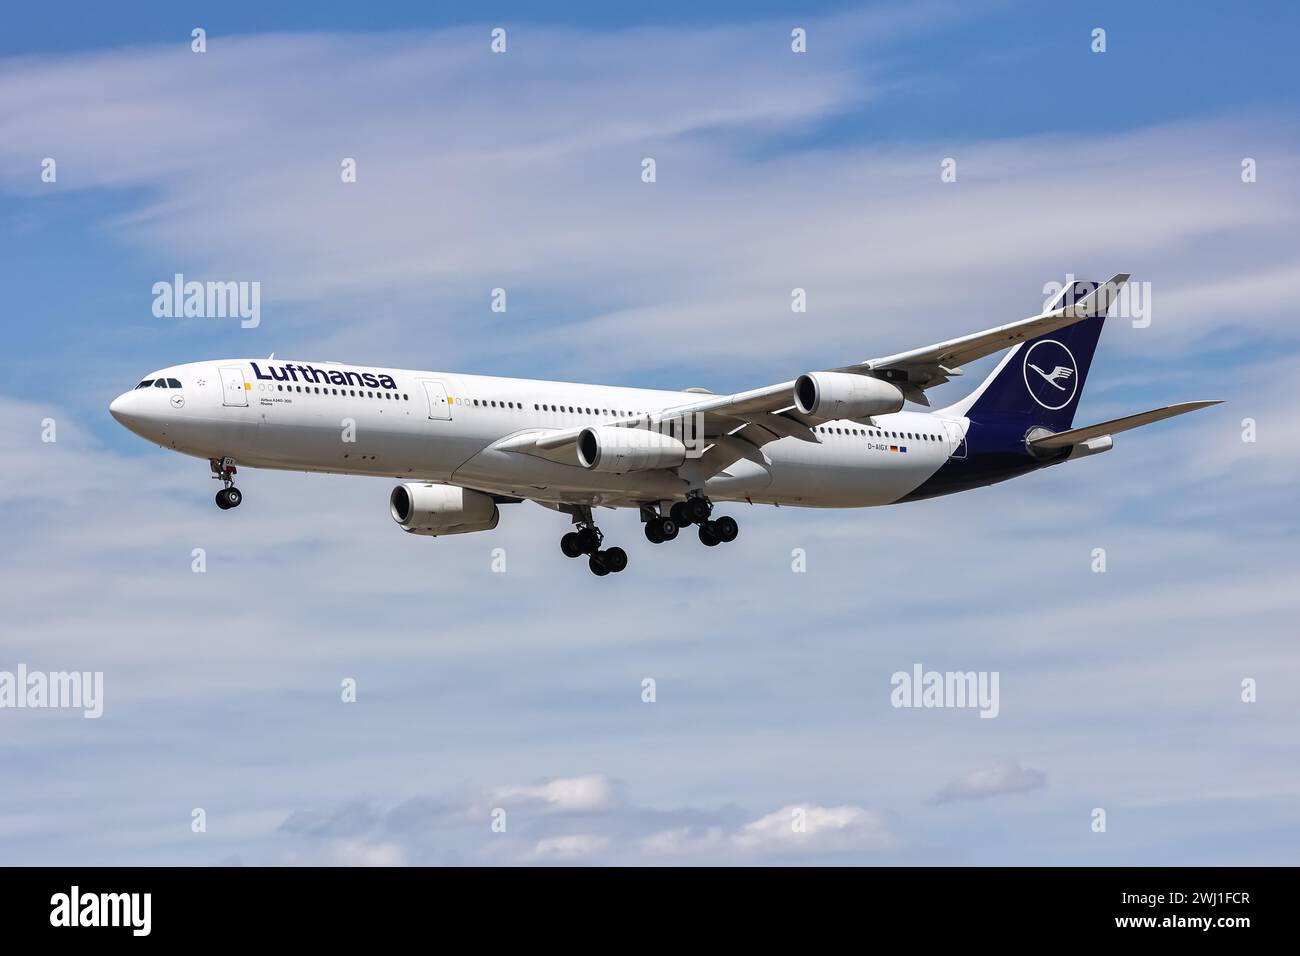 Lufthansa Airbus A340-300 Aircraft Frankfurt Airport in Germany Stock Photo